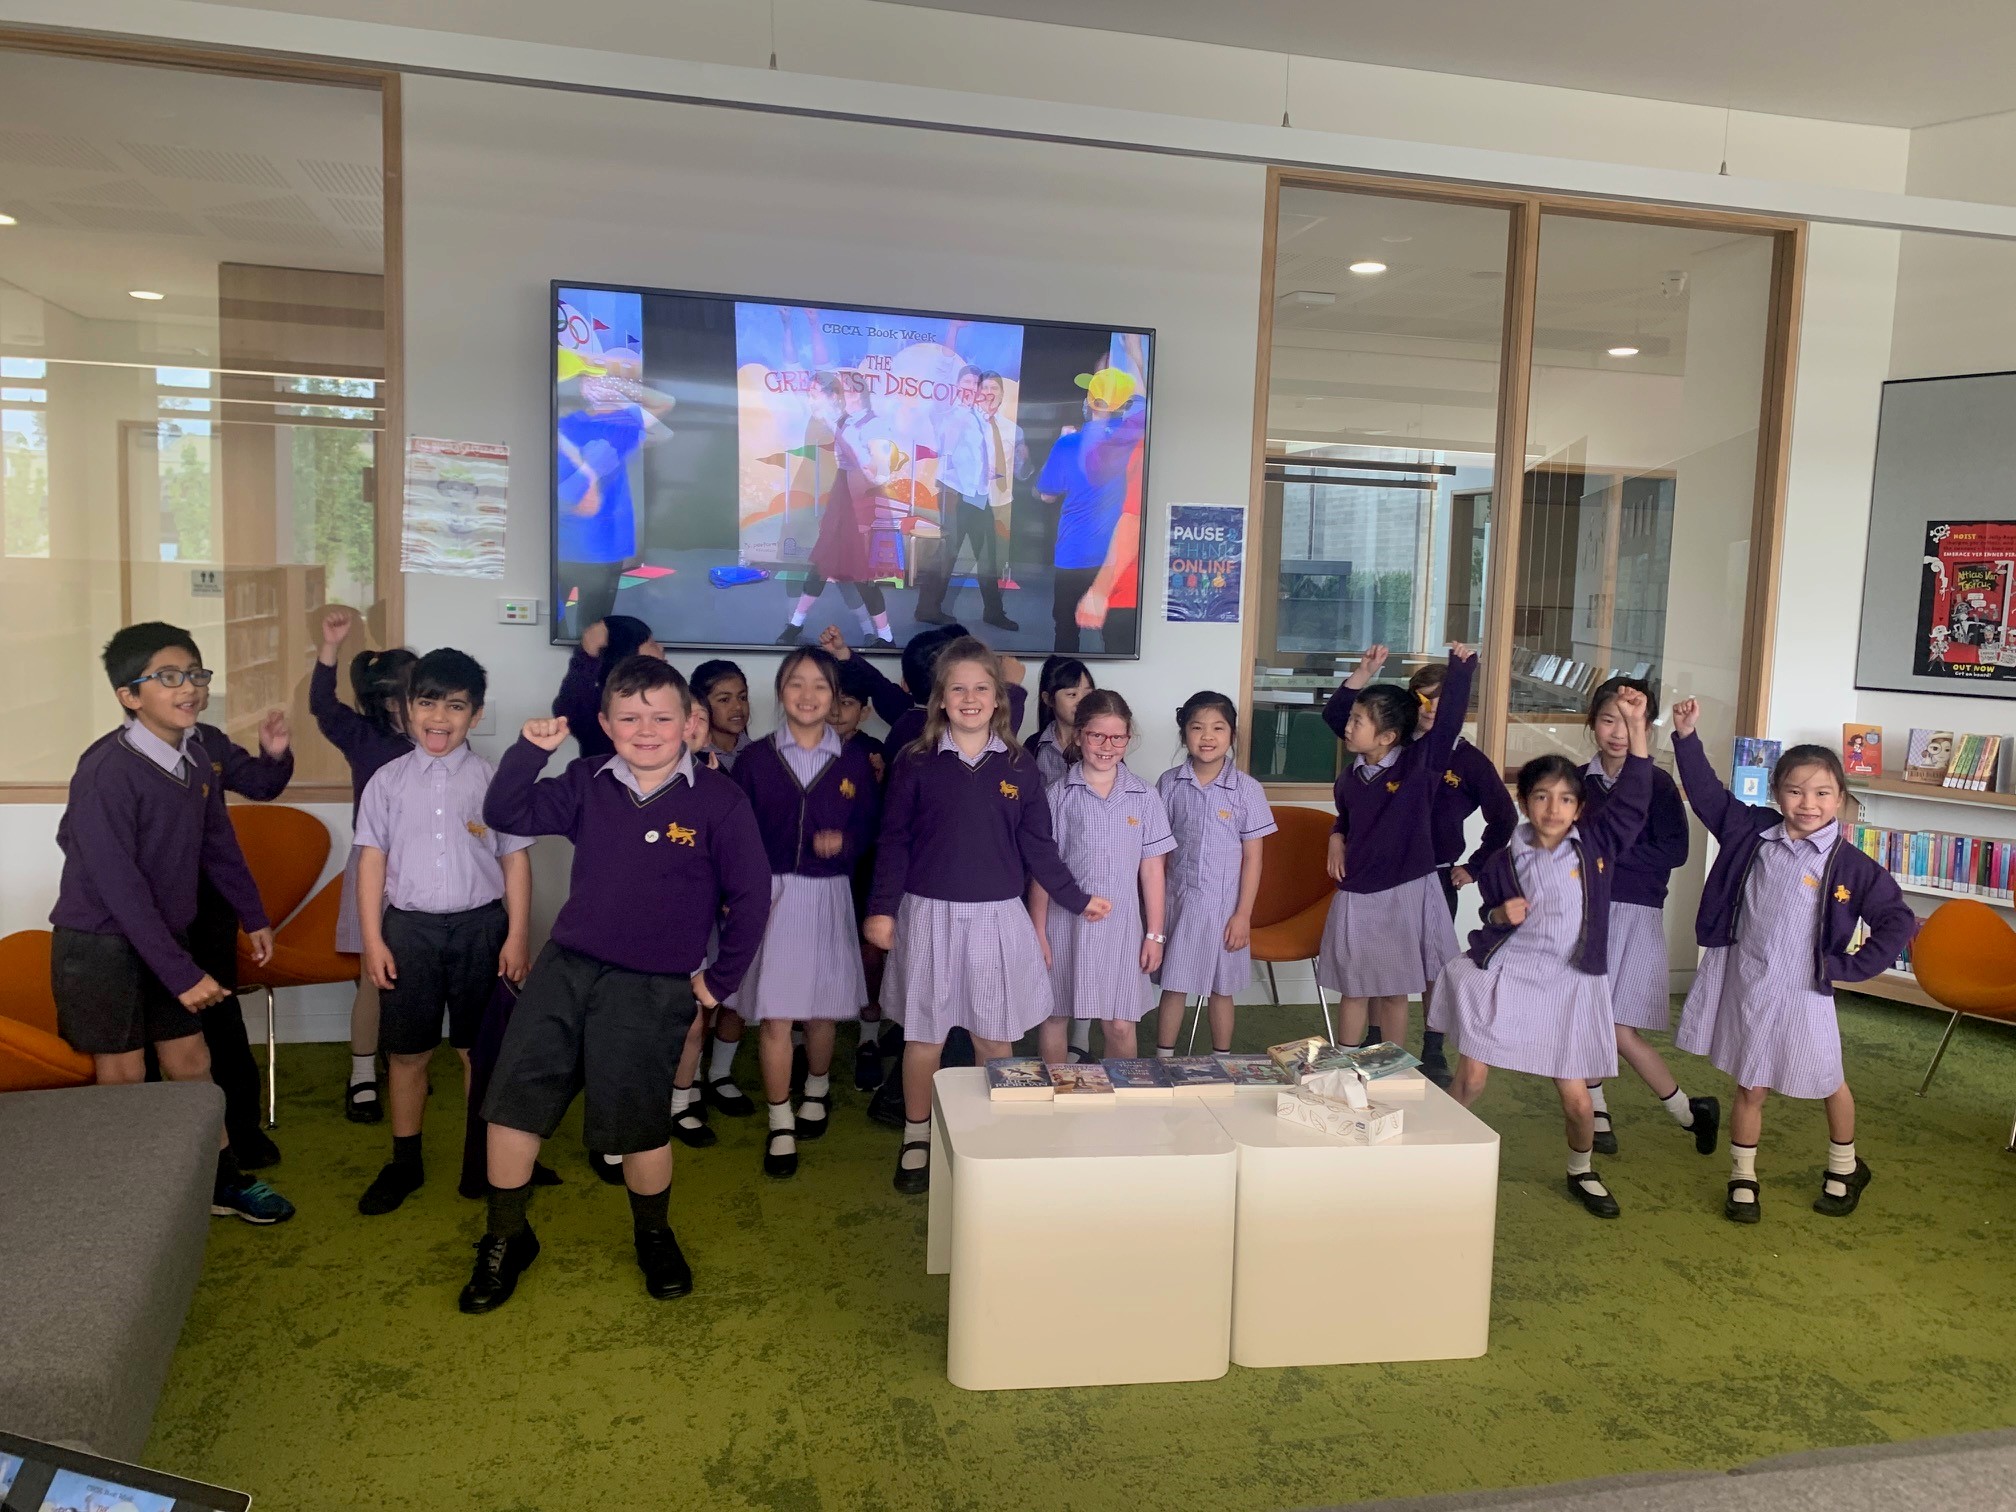 Year 2 class dancing in the library